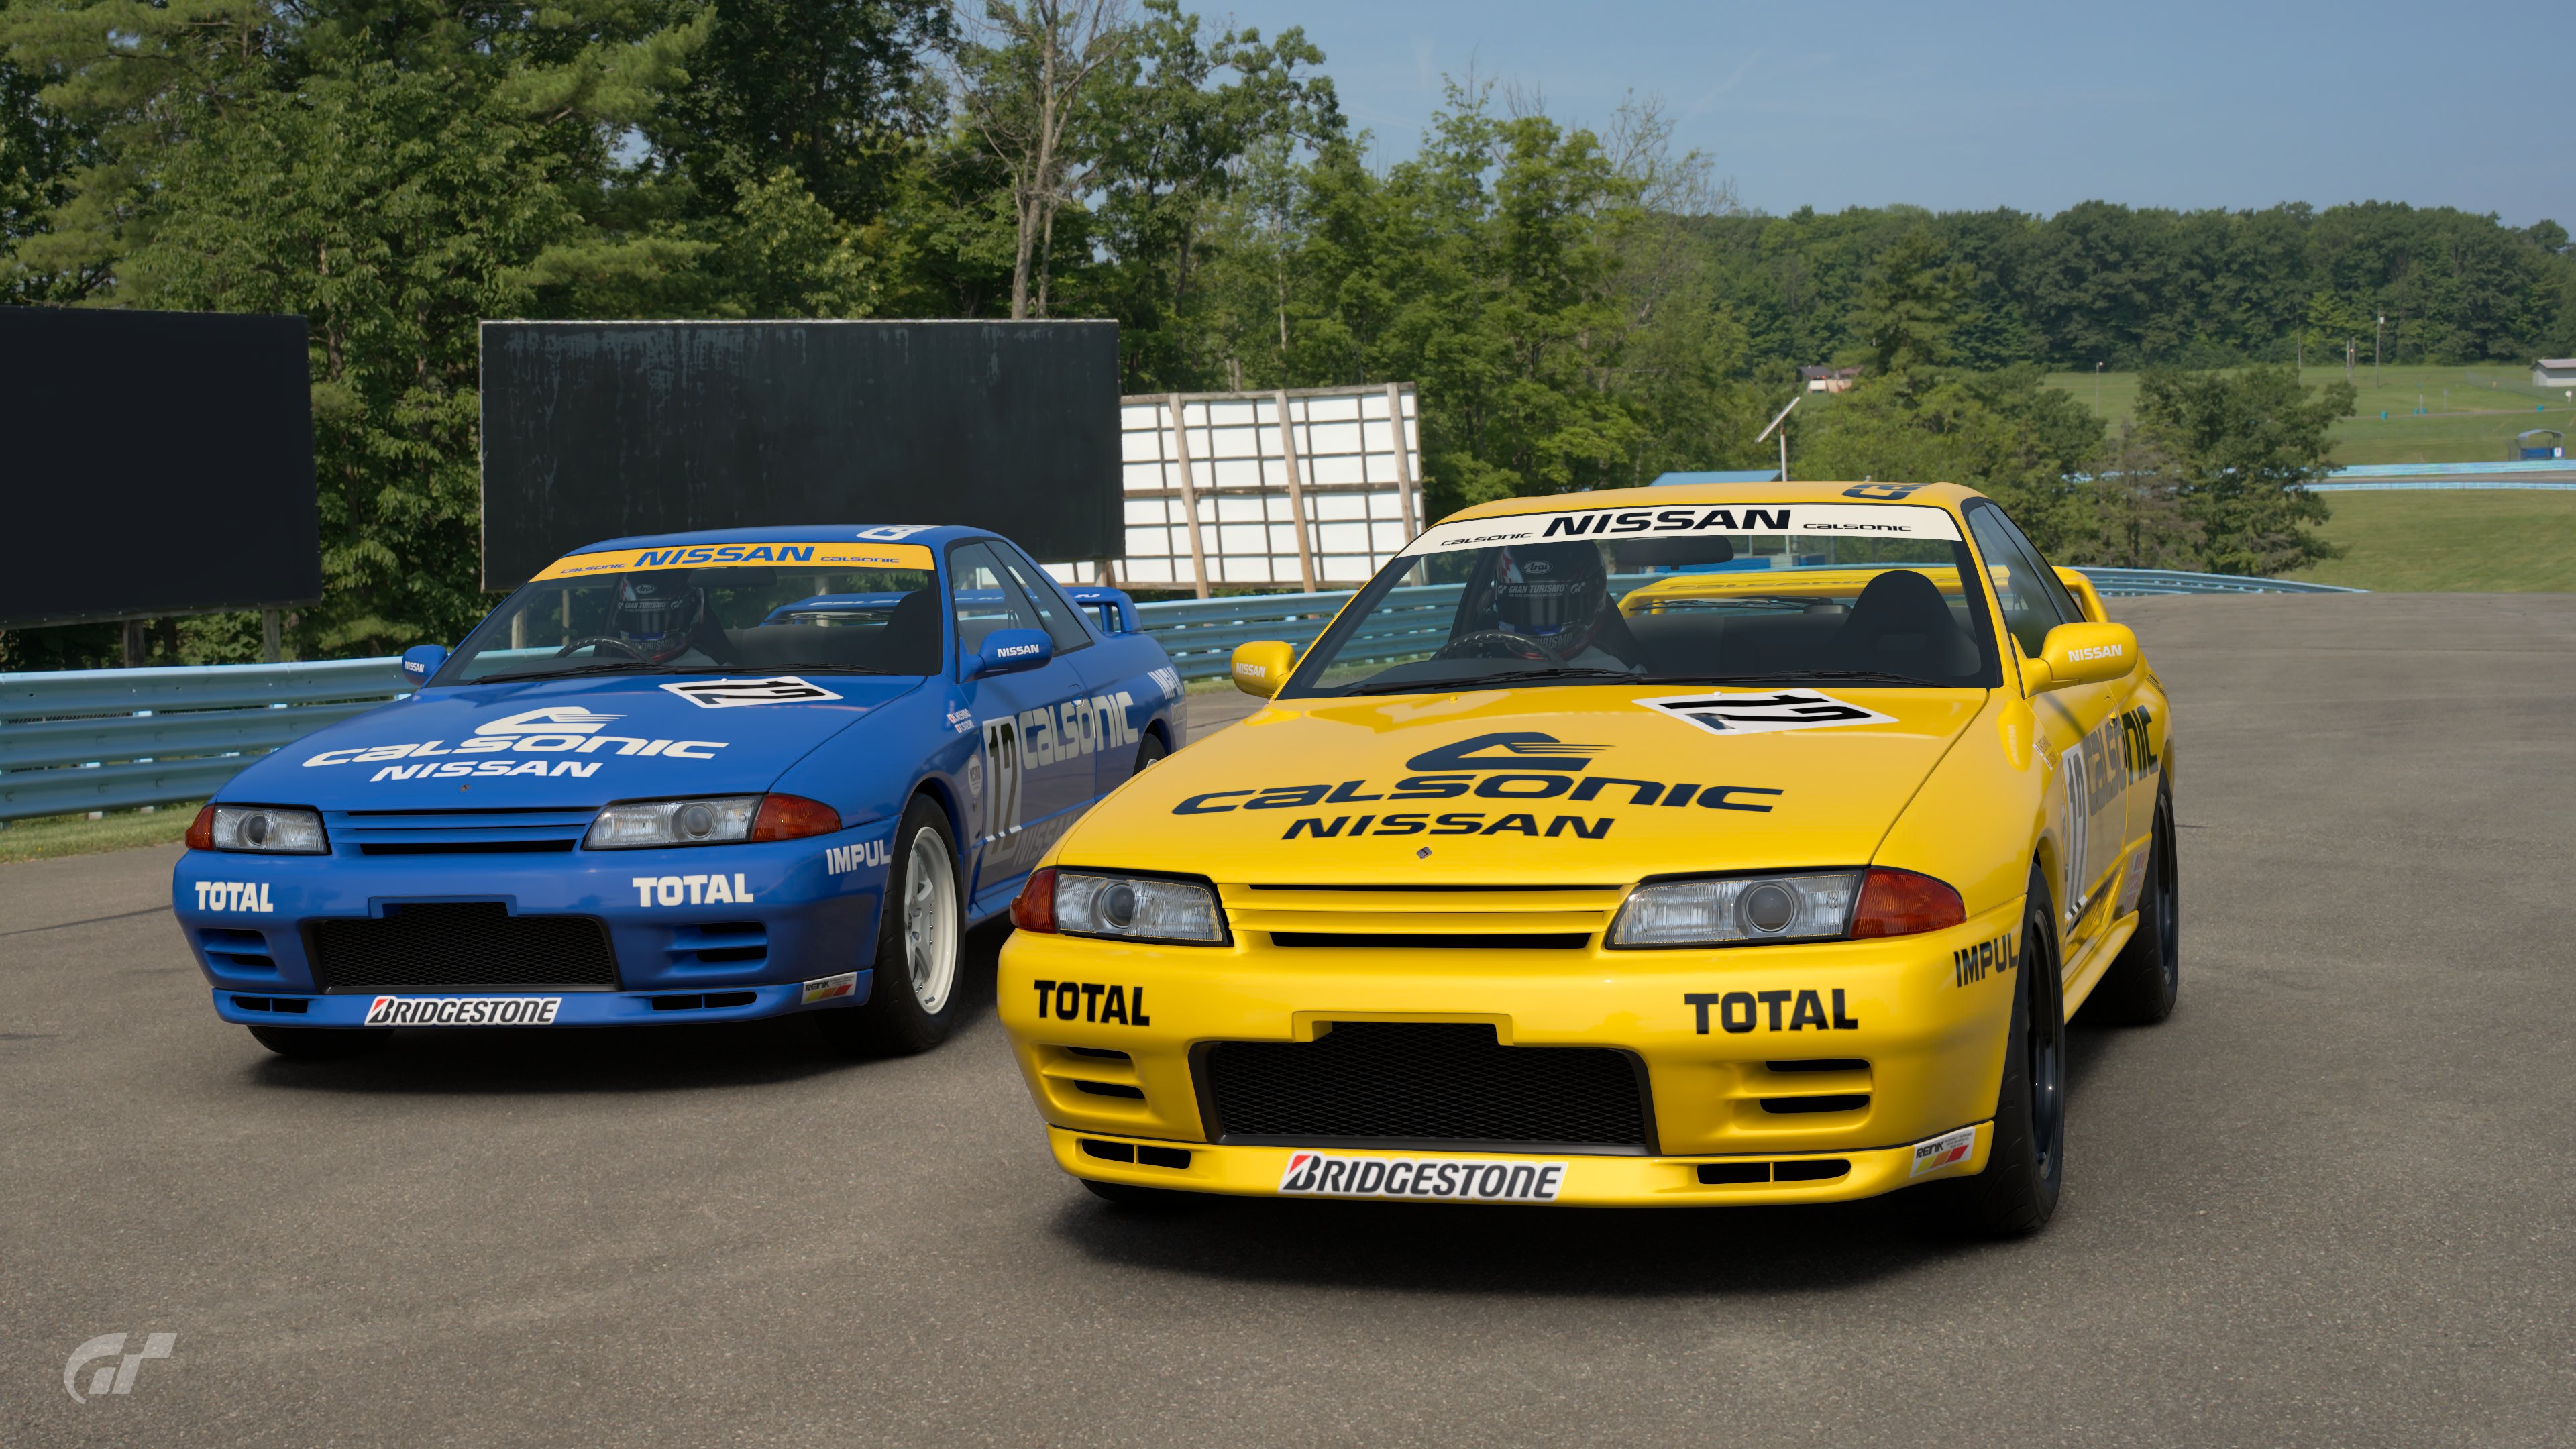 Calsonic R32s at the Glen 2